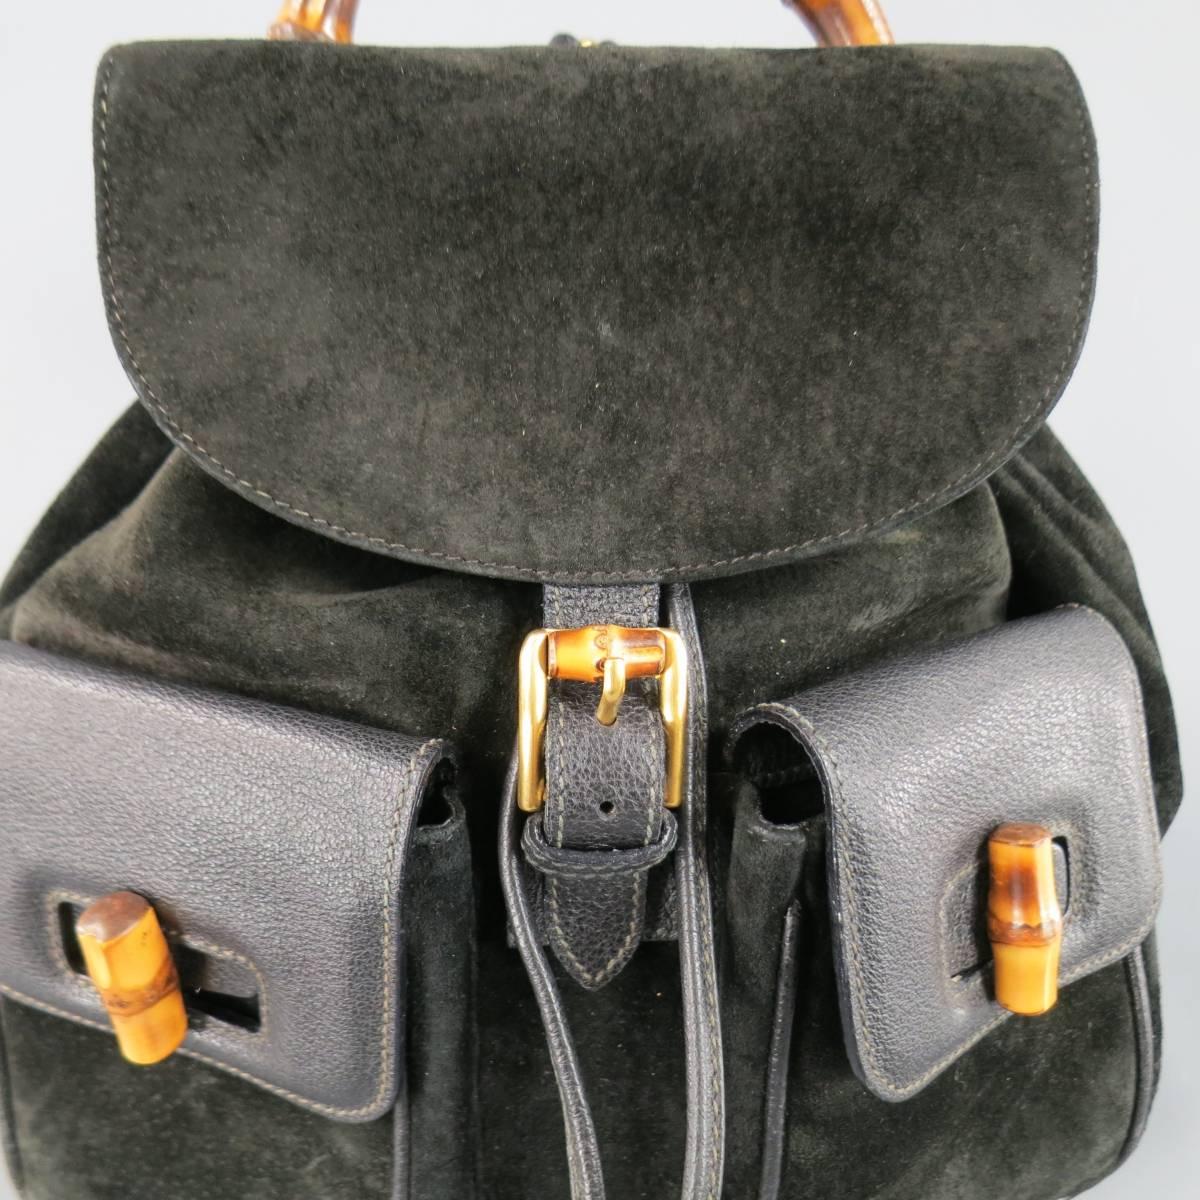 Vintage GUCCI backpack in black suede featuring double patch pockets with leather flap and bamboo closure, drawstring top, flap with buckle closure, and bamboo handle. Minor aging throughout suede. Made in Italy.
Retails at $2500.00.

Good Pre-Owned